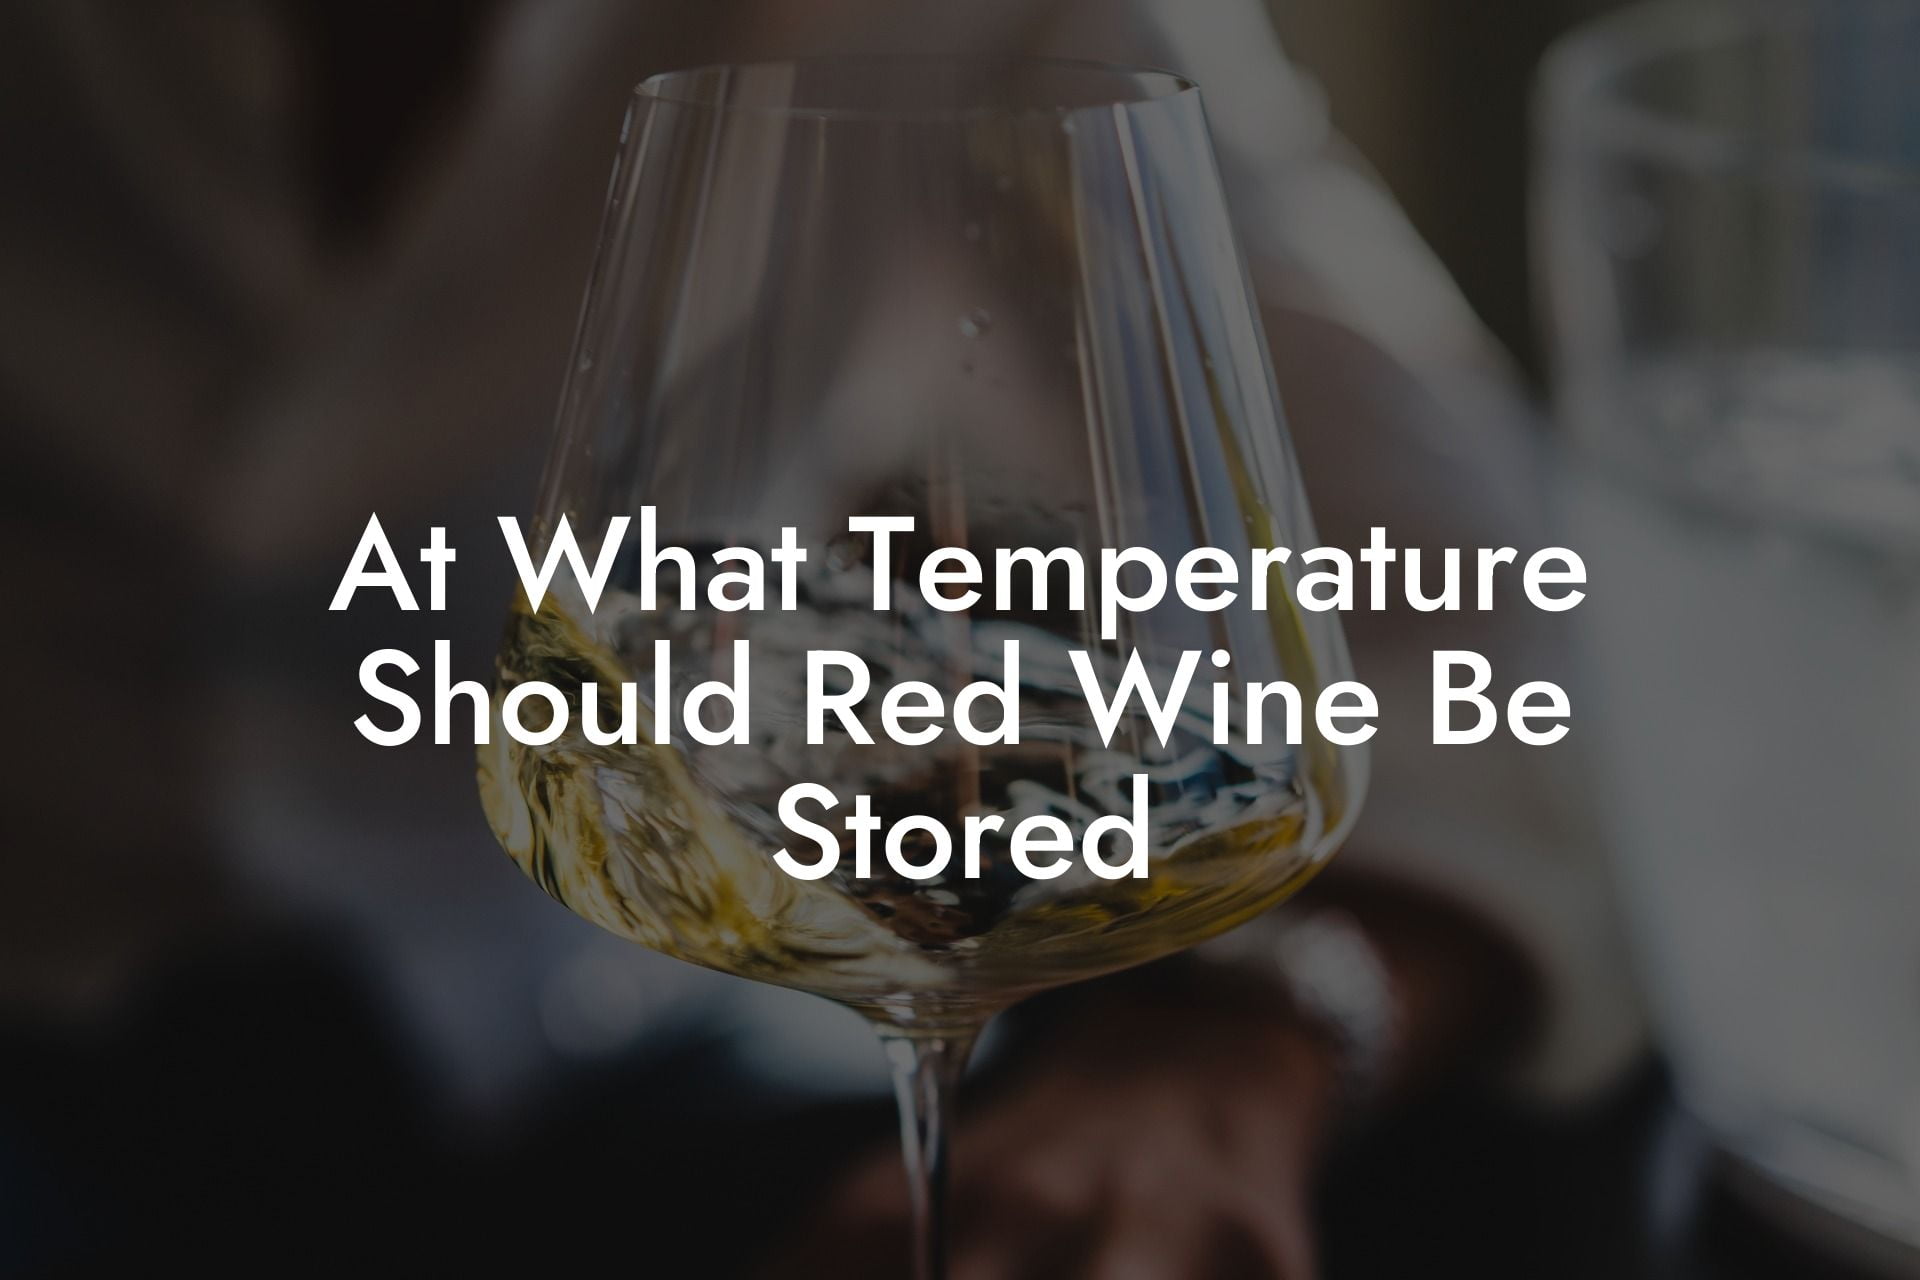 At What Temperature Should Red Wine Be Stored